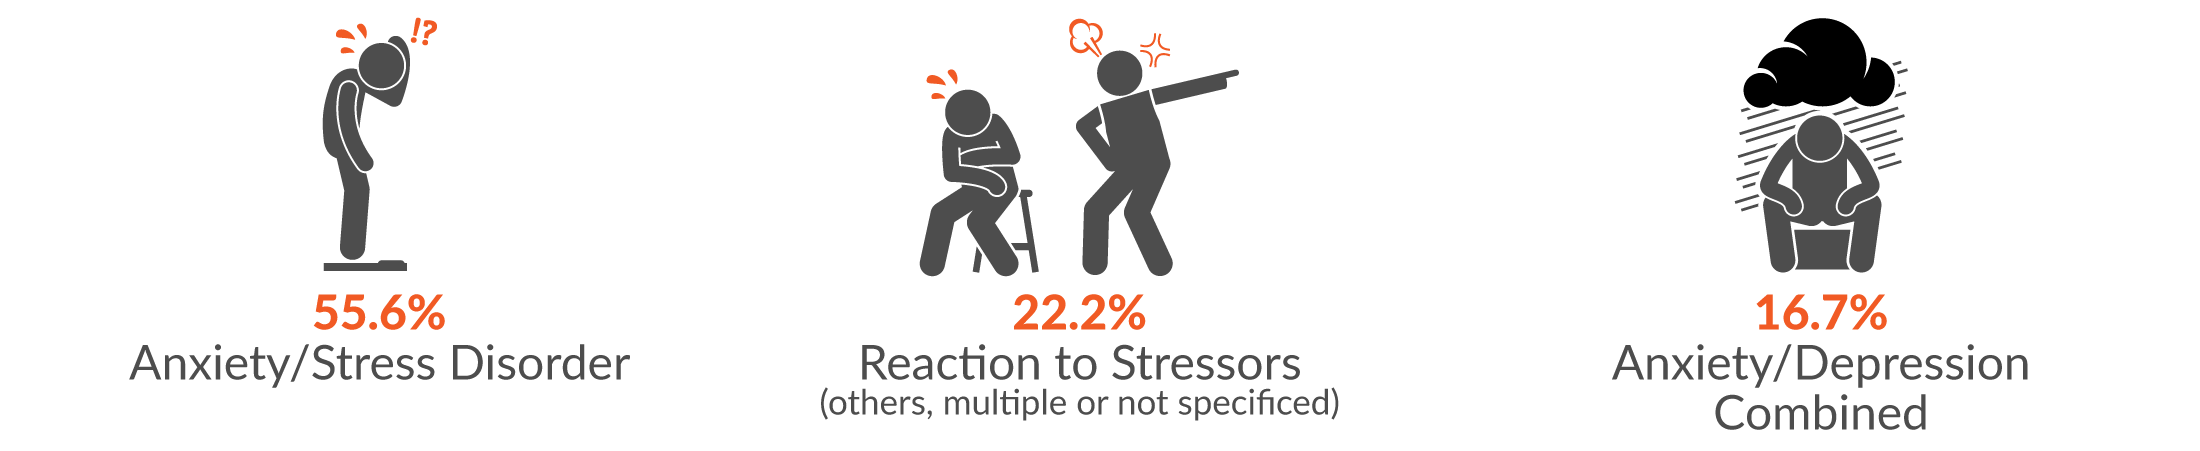 This infographic shows the main three injury groups resulting from mental stress were 55.6% anxiety/stress disorder; 22.2% reaction to stressors; and 16.7% anxiety/depression combined.